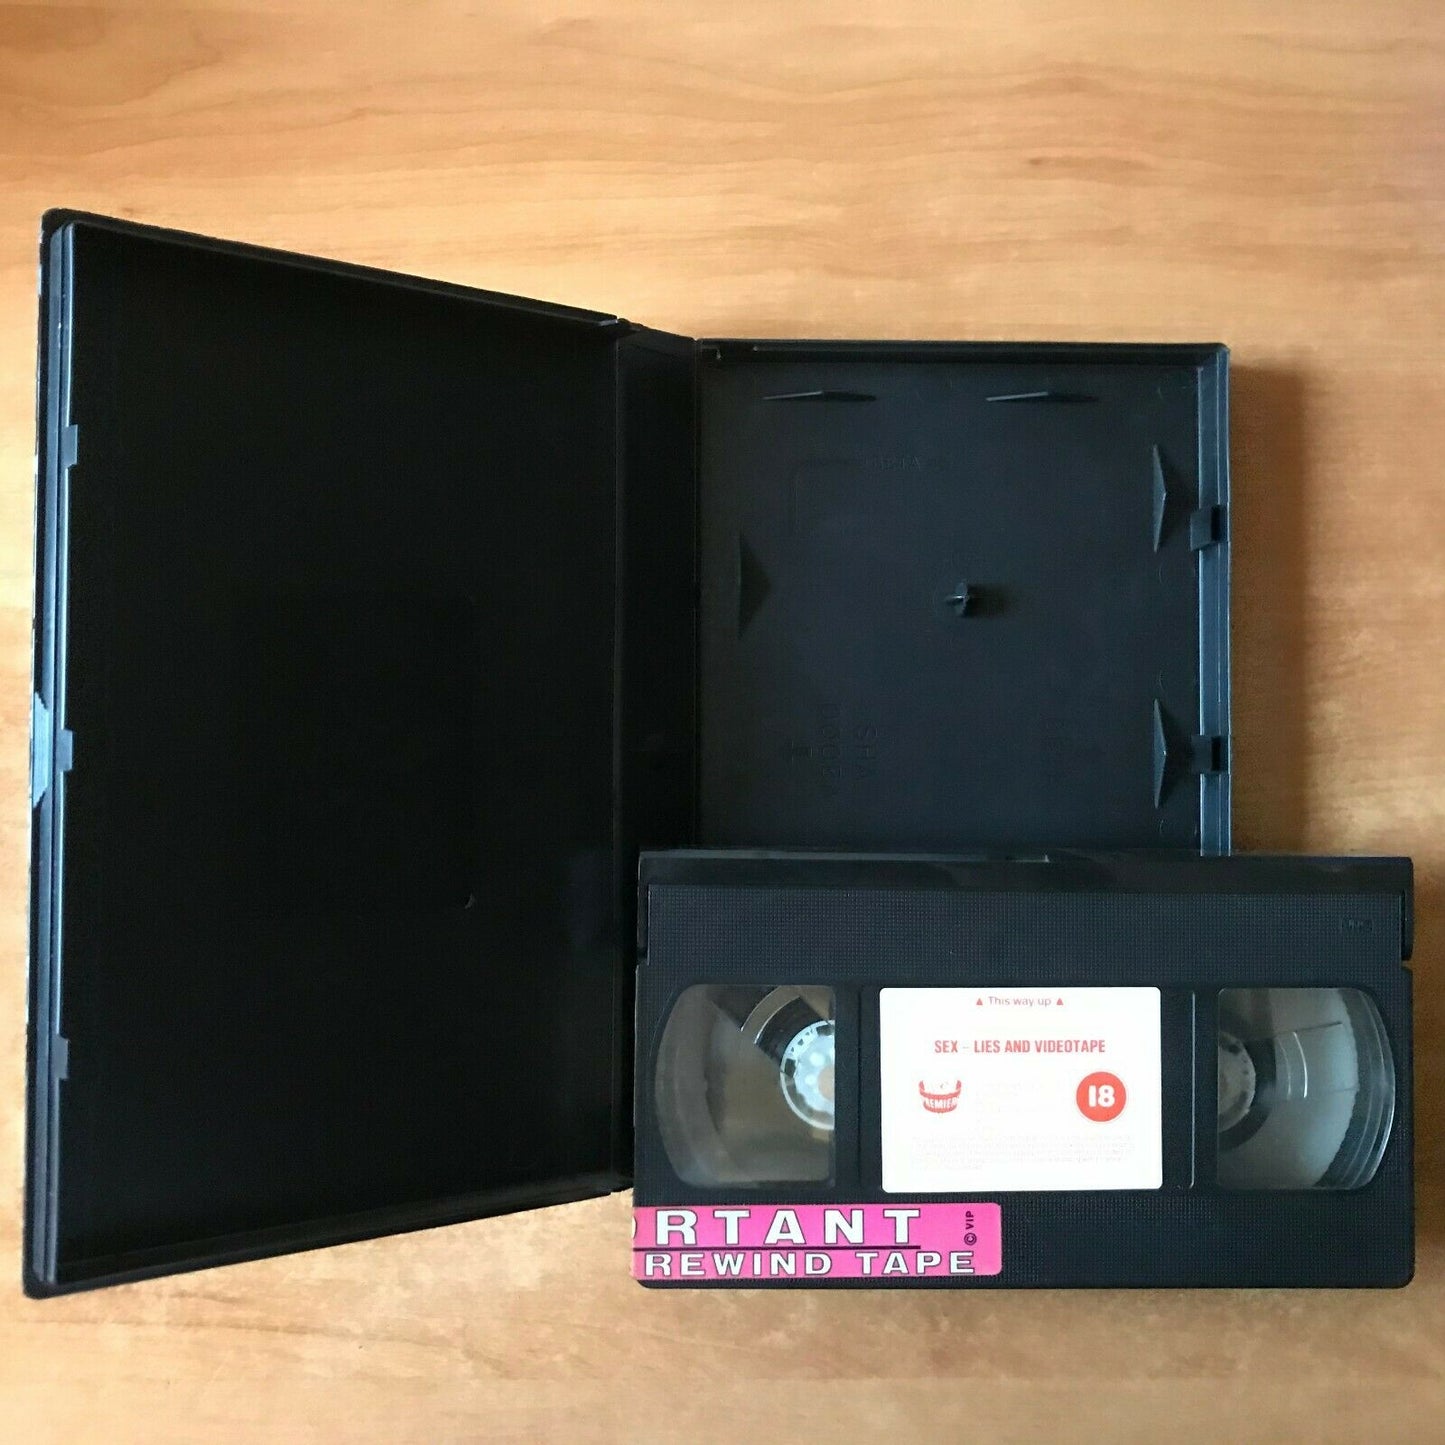 Sex,Lies And Videotape (1989): Drama [Large Box] Rental - Andie MacDowell - VHS-